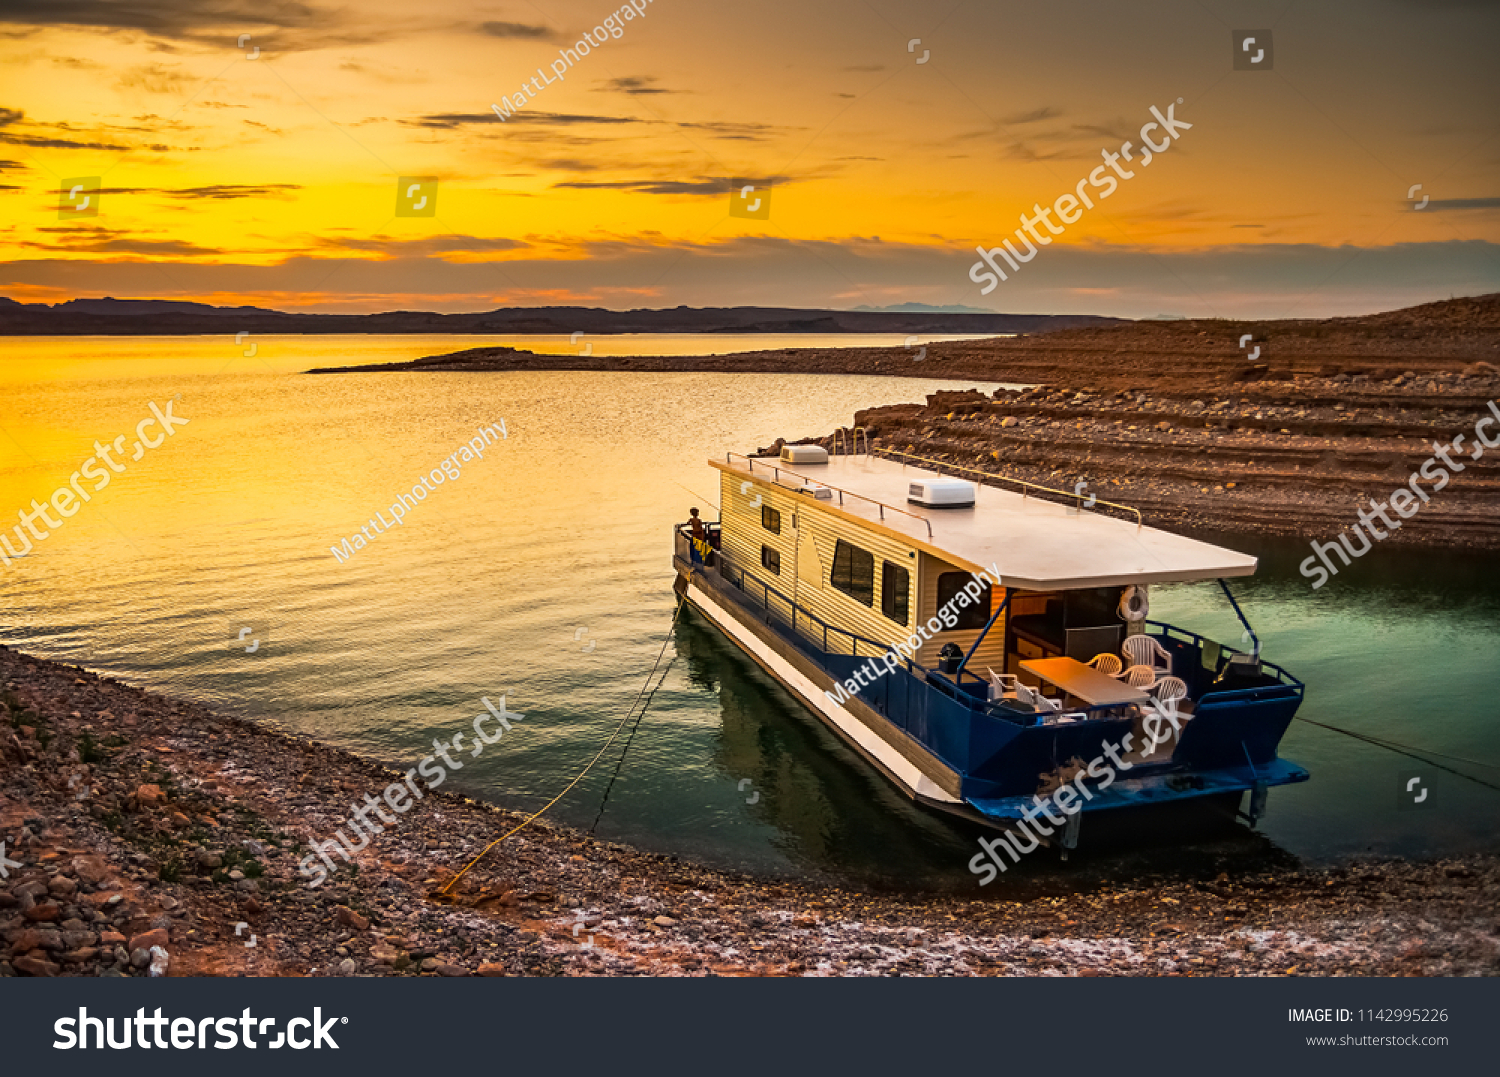 Beautiful and scenic landscape of the Lake Mead National Recreation Area with a houseboat moored to the shores of a bay with a dramatic sky at sunset, Nevada. Vacation and tourism concept. #1142995226